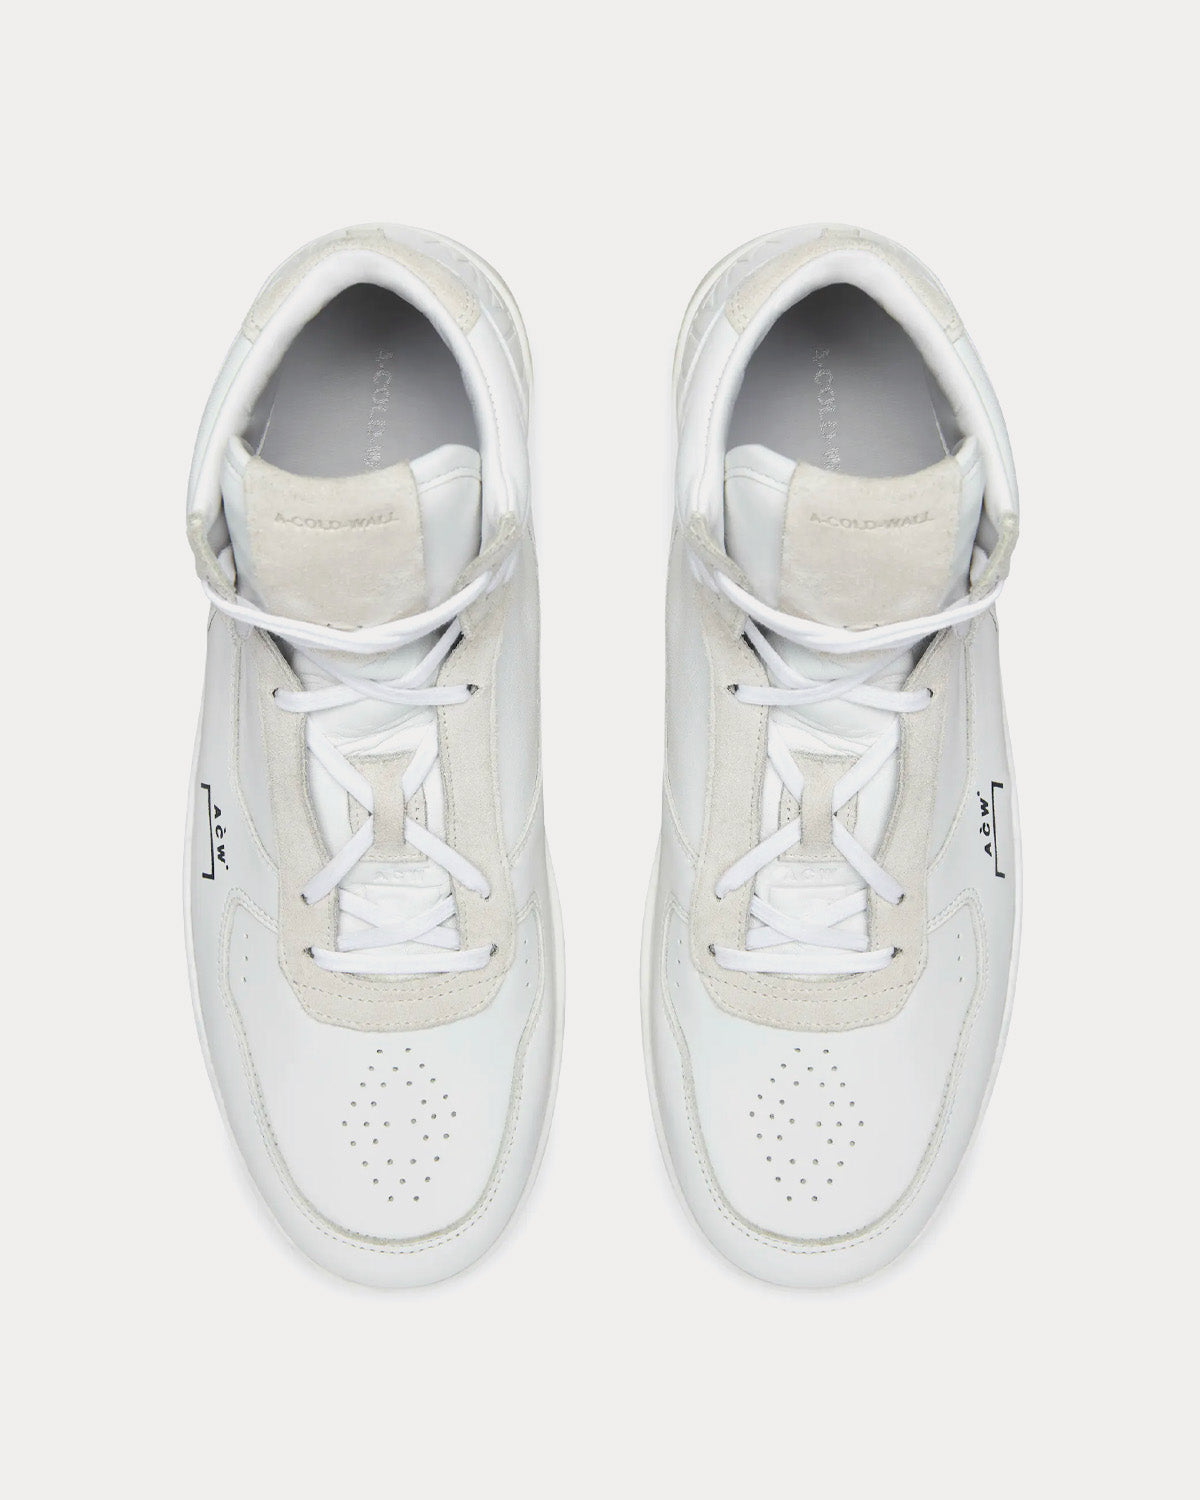 A-COLD-WALL* - Luol Leather Optic White High Top Sneakers